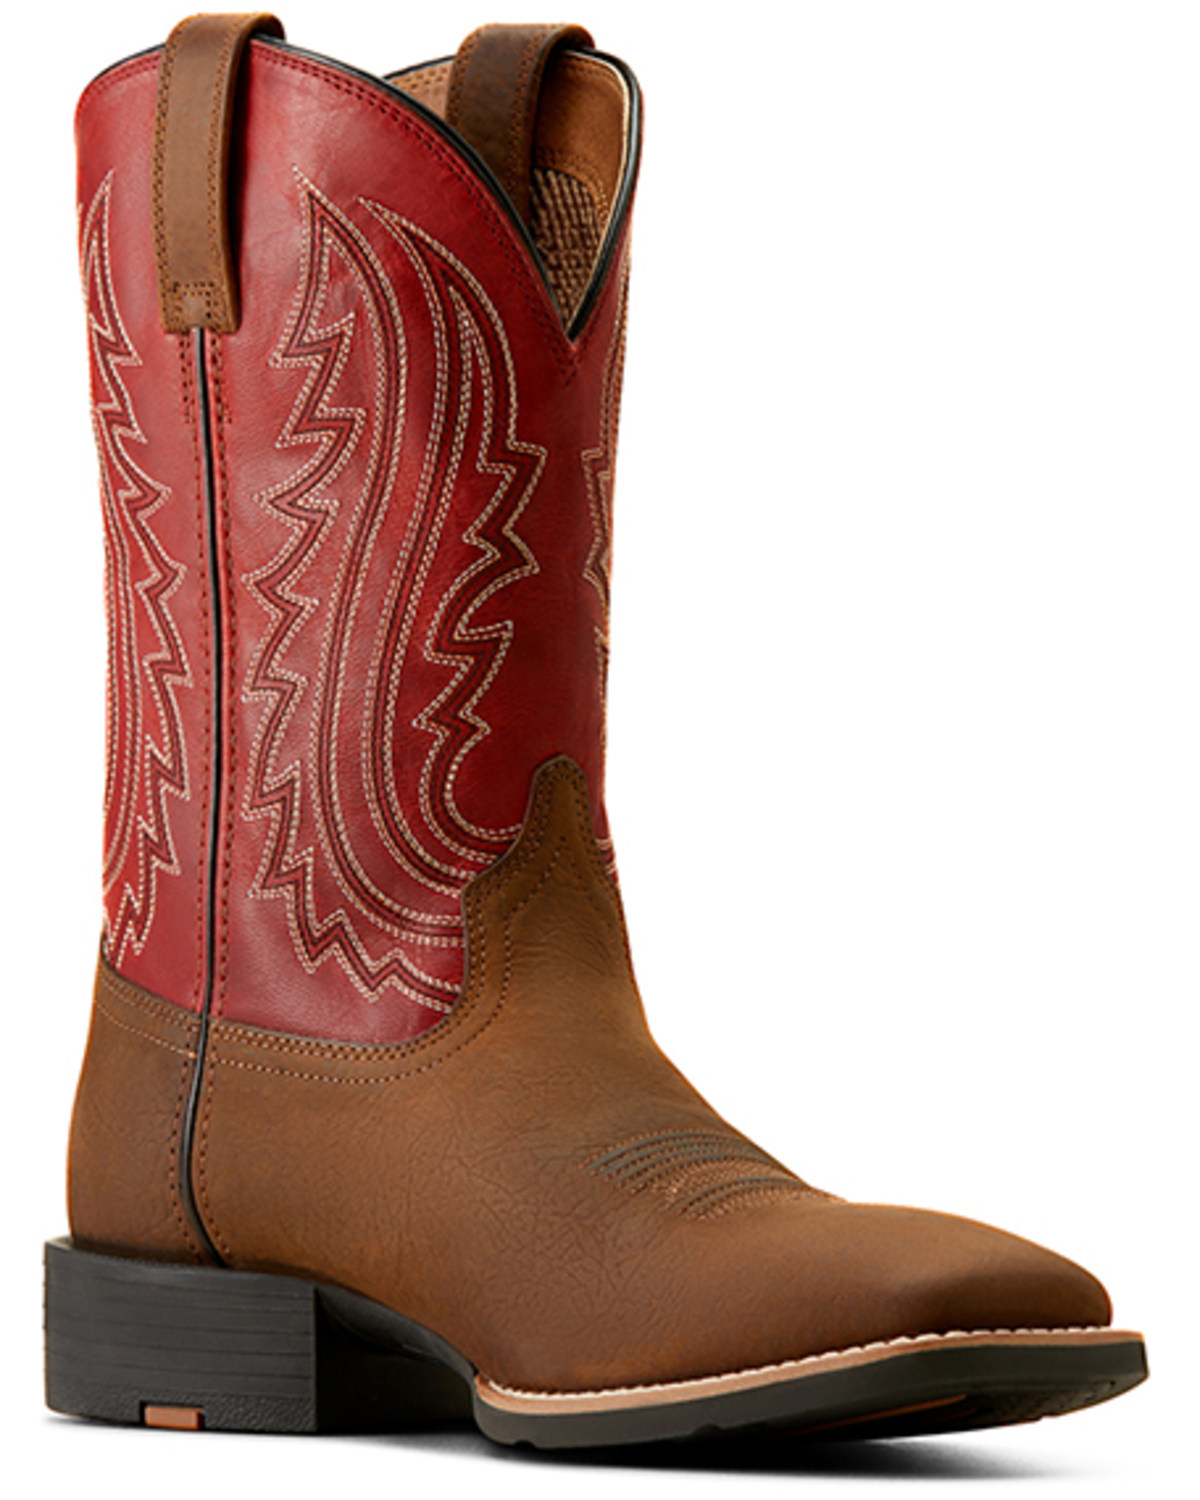 Ariat Men's Sport Big Country Western Boots - Broad Square Toe